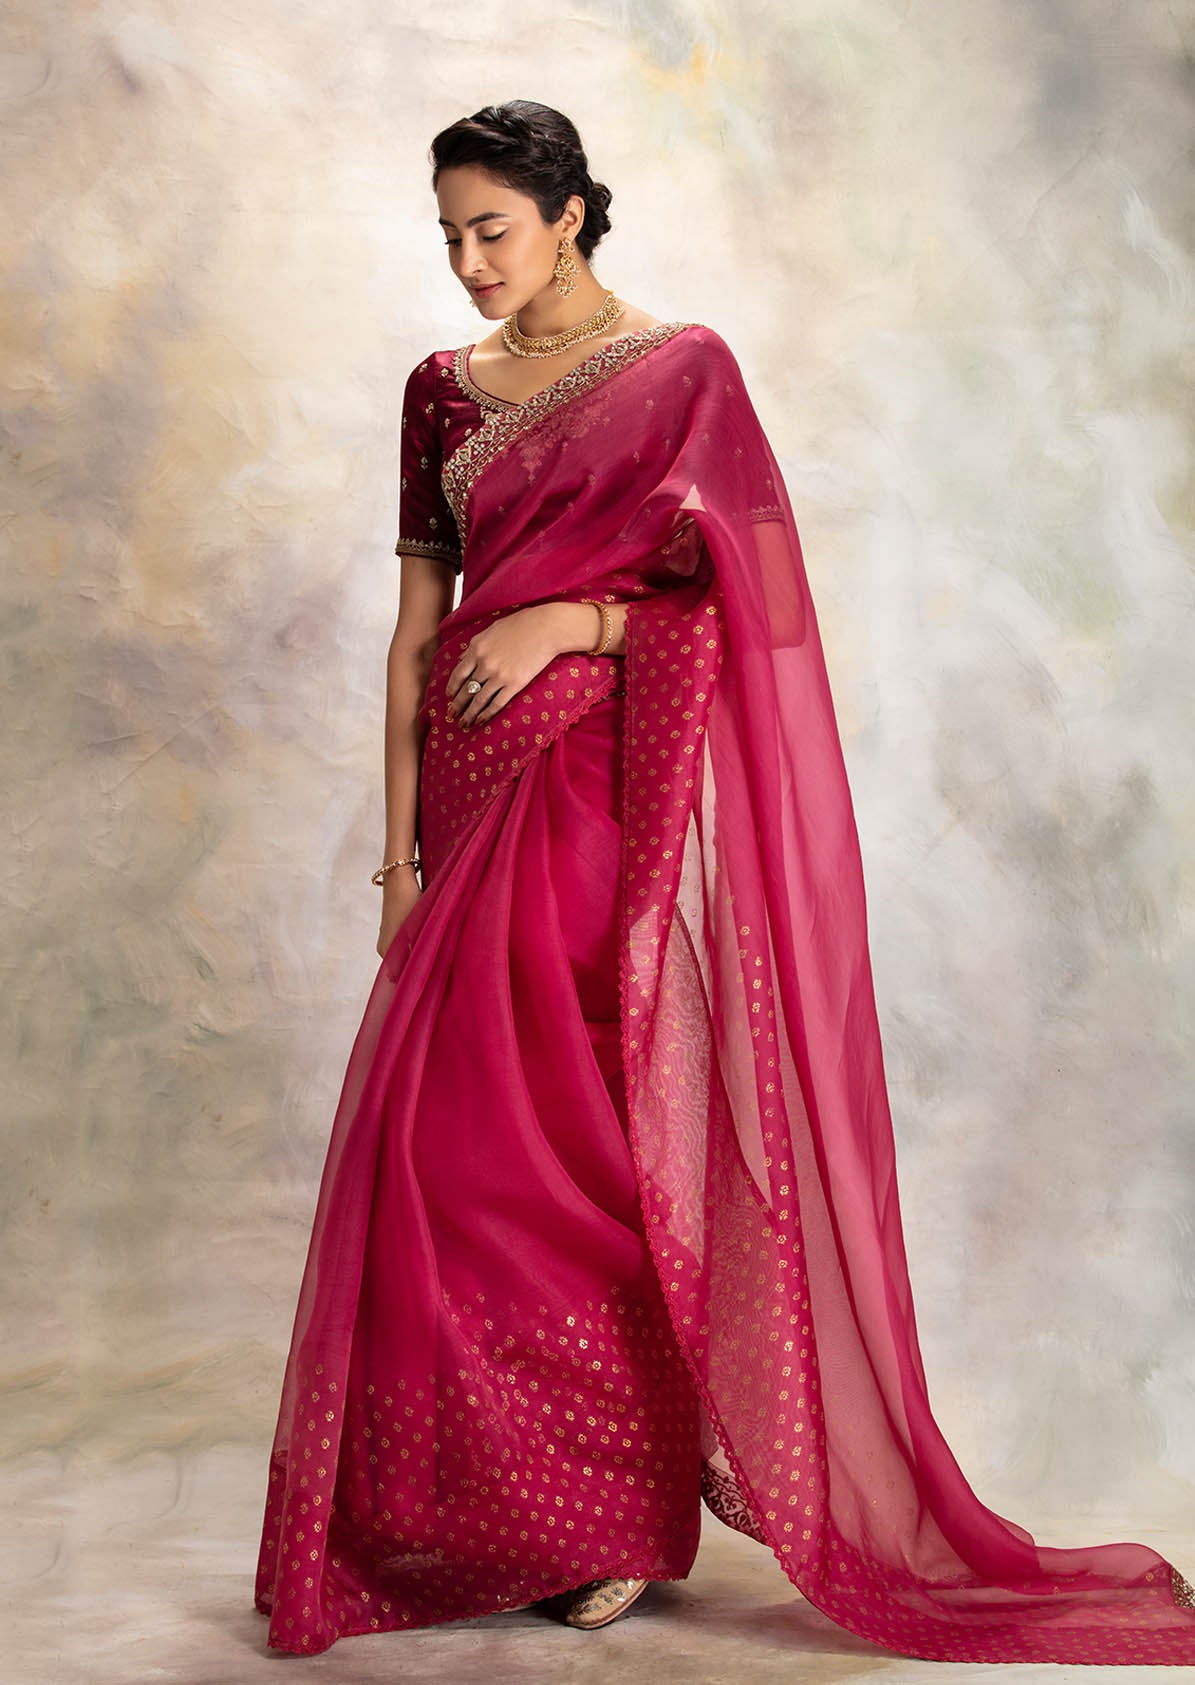 Ruby red slit pre stiched saree with printed balloon sleeves blouse   Dheeru Taneja